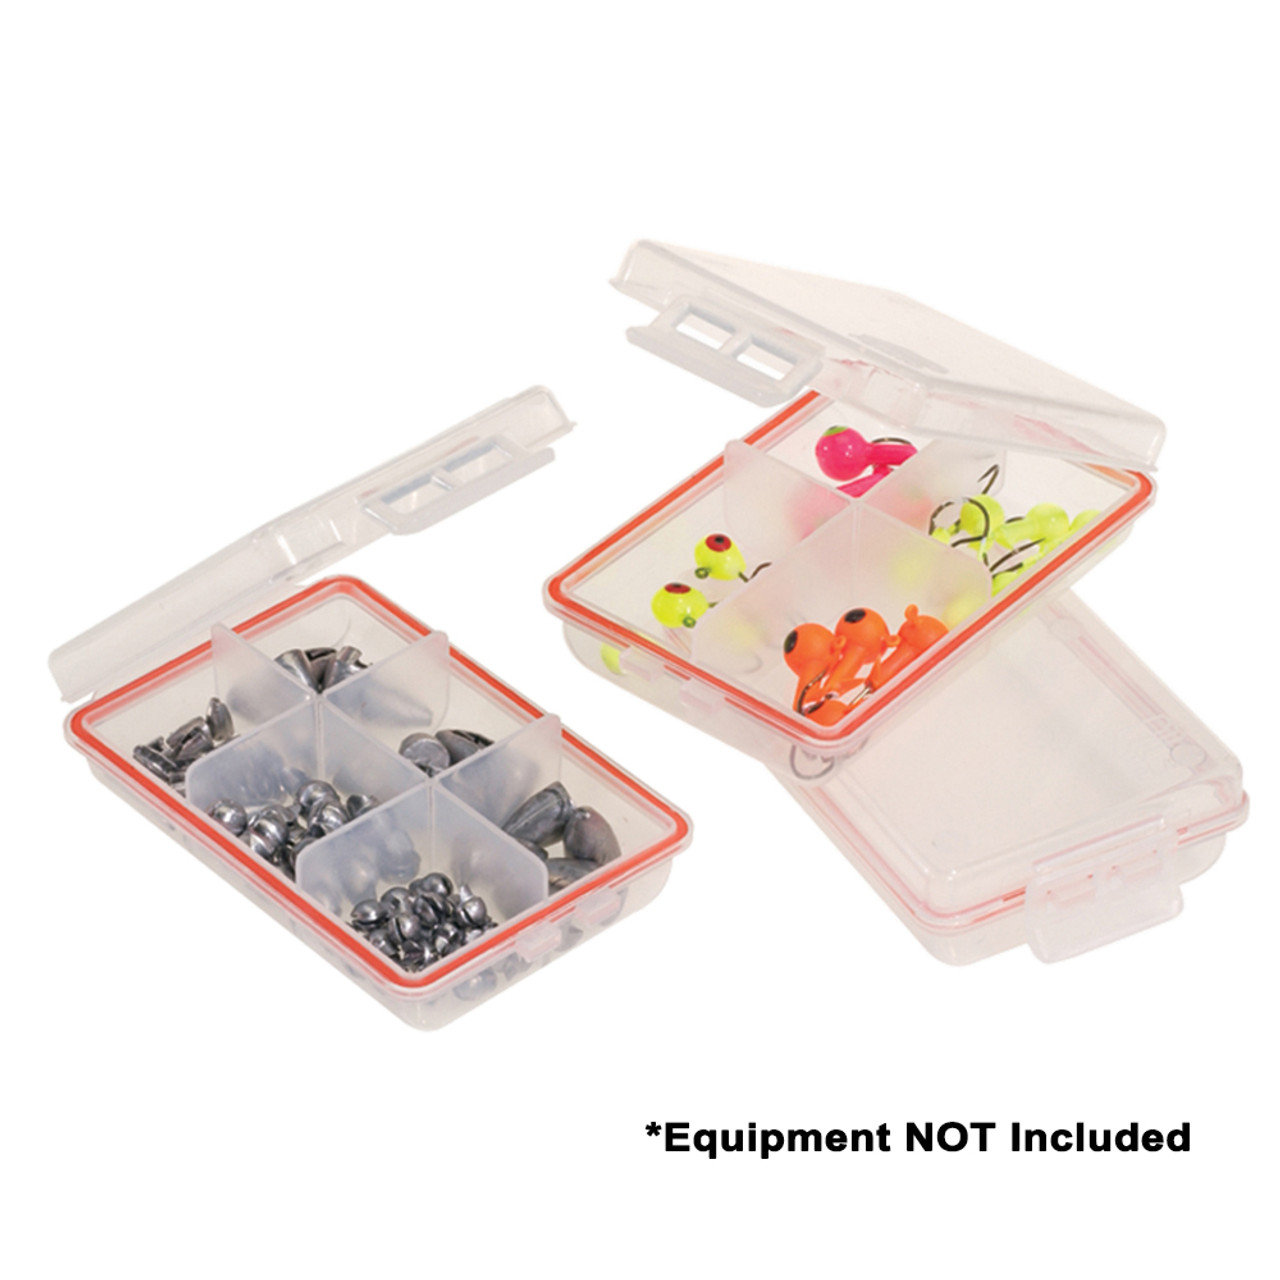 Plano Pocket Tackle Organizer - Clear - P/N 341406 - ProPride Hitch